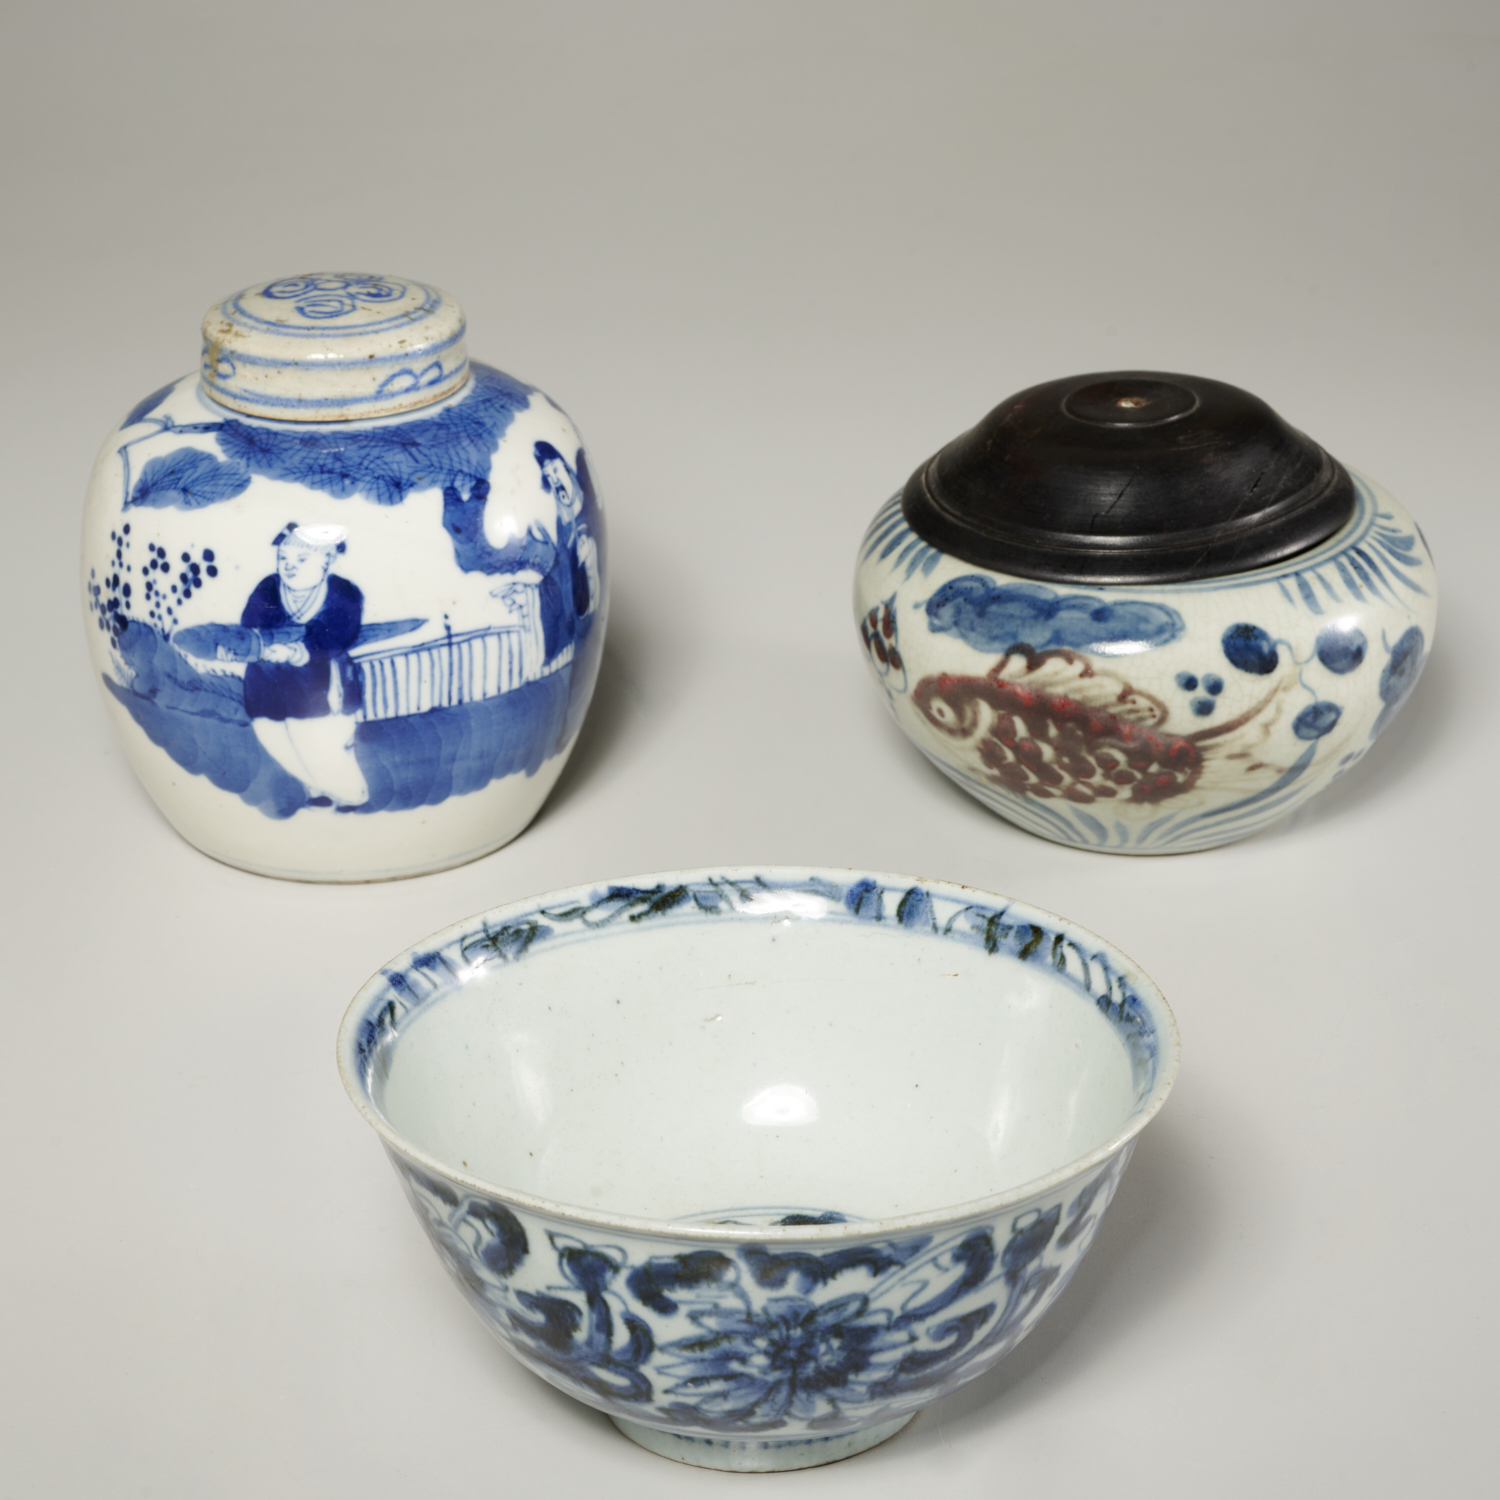 ANTIQUE CHINESE BLUE & WHITE JARS